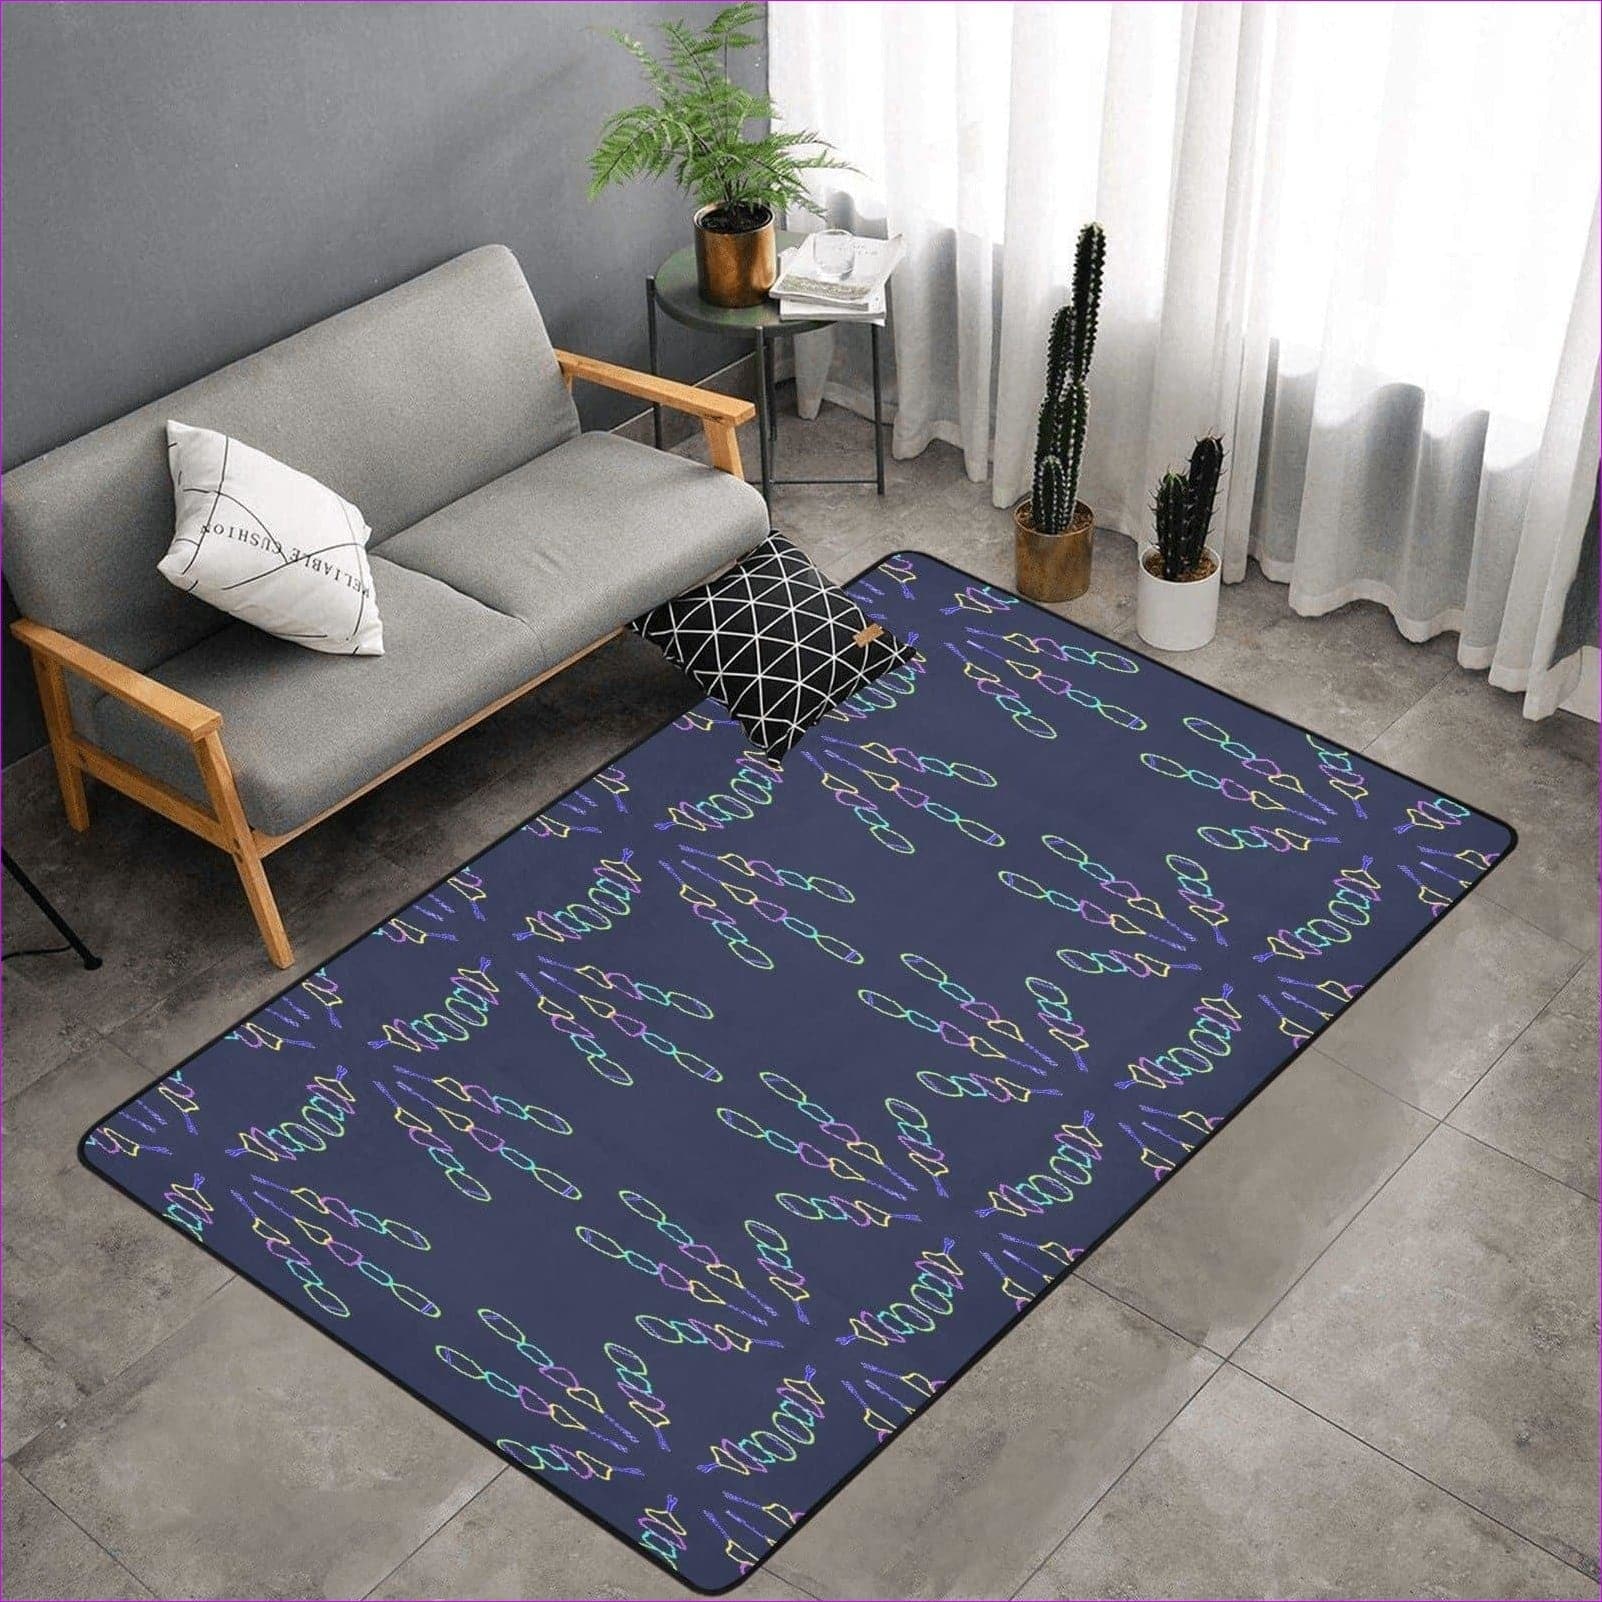 One Size Mandala Blue Area Rug with Black Binding 7'x5' - Mandala Area Rug with Black Binding 7'x5' - Area Rugs at TFC&H Co.